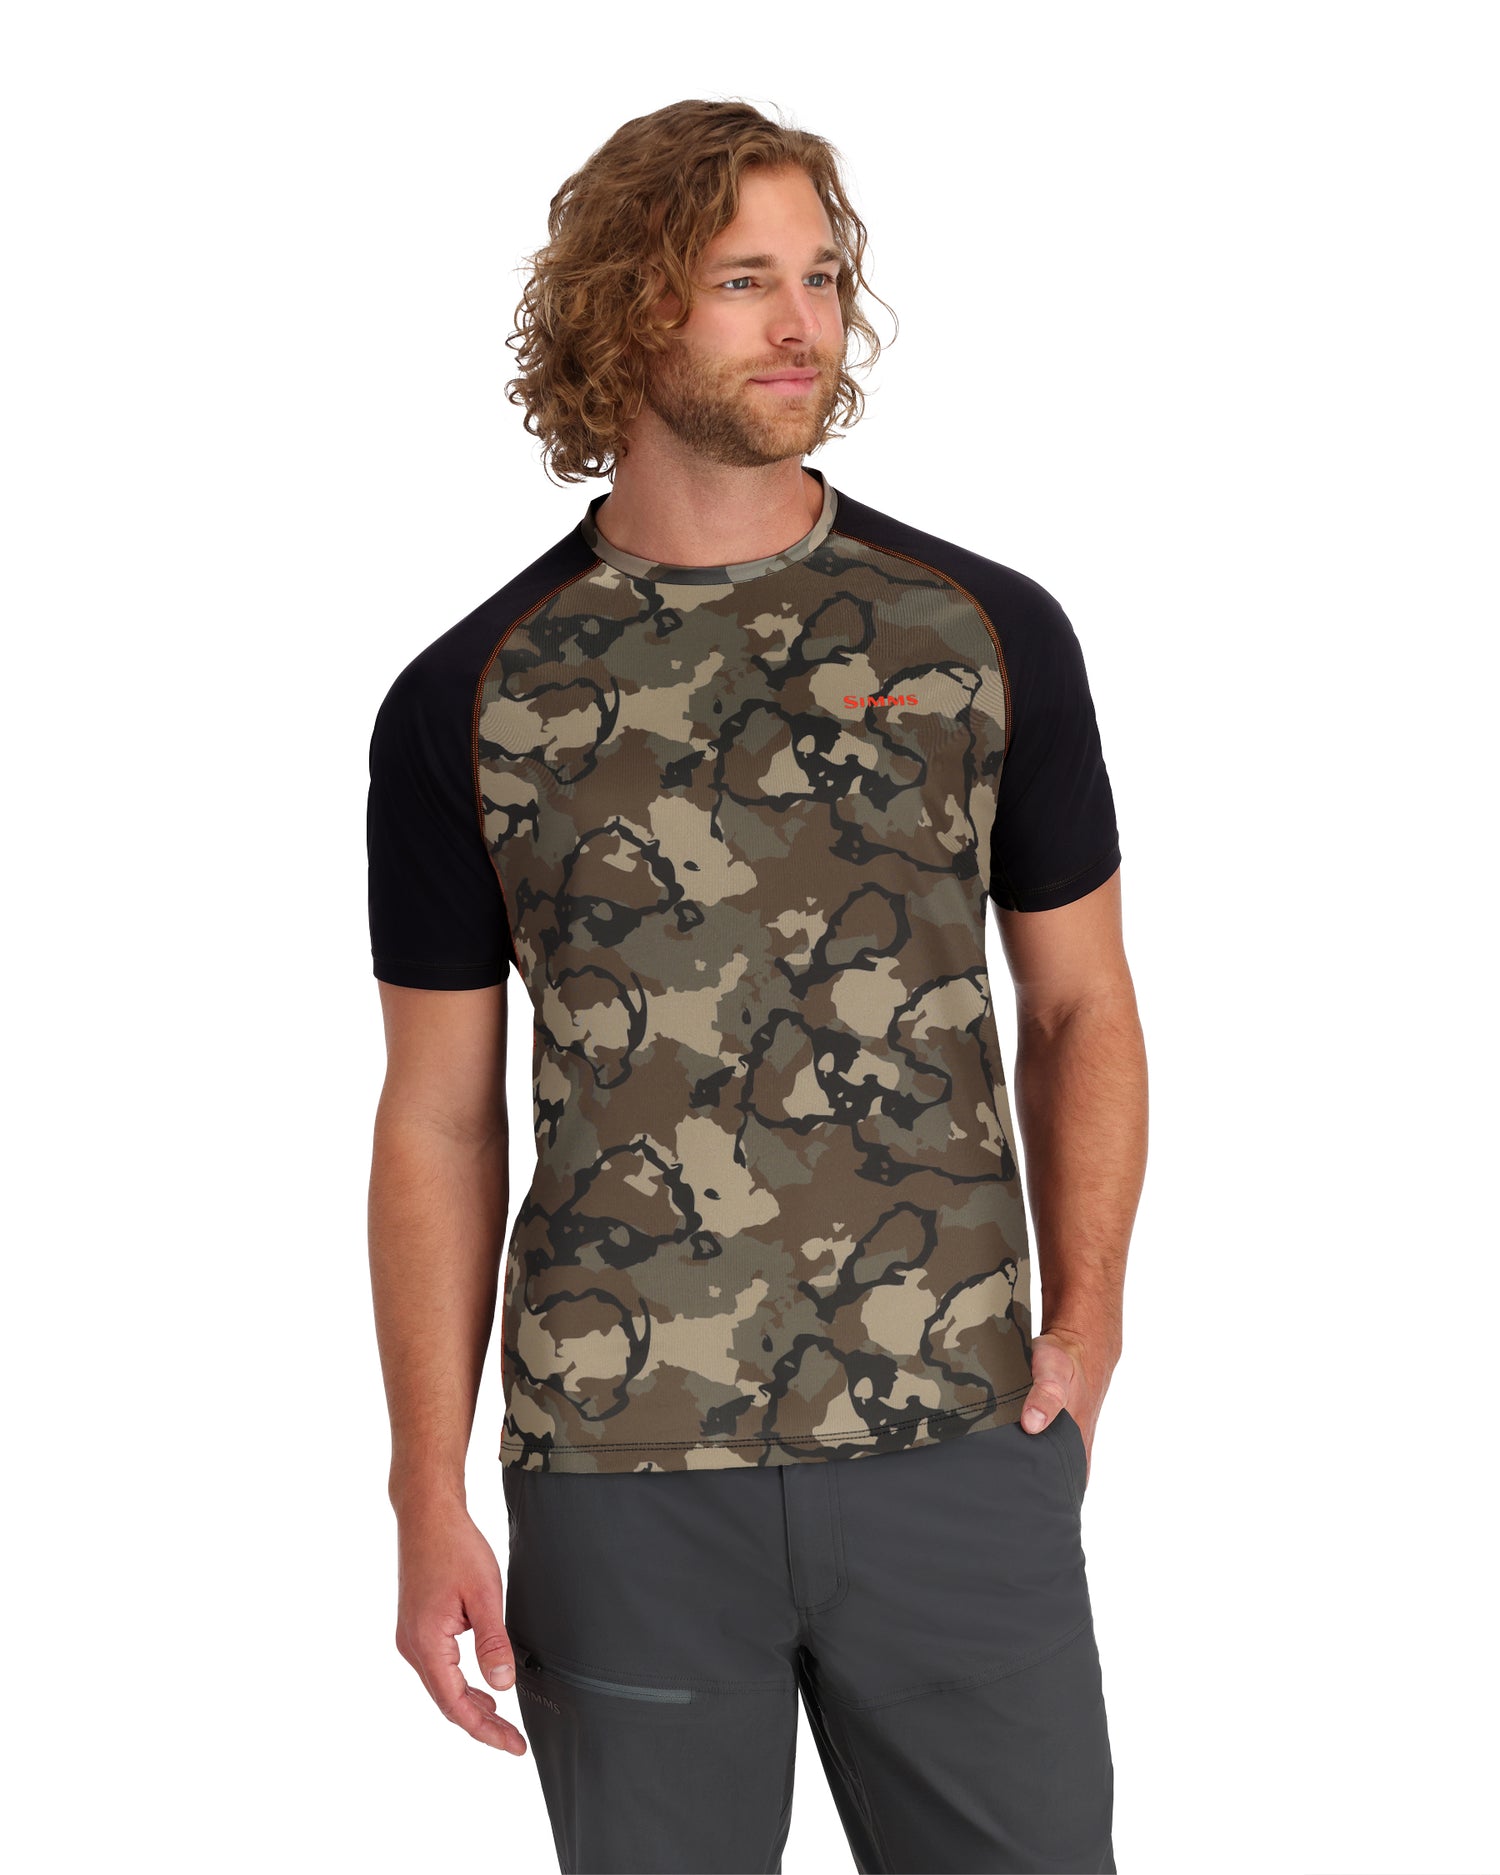 M's Simms Challenger Solar Tee | Simms Fishing Products